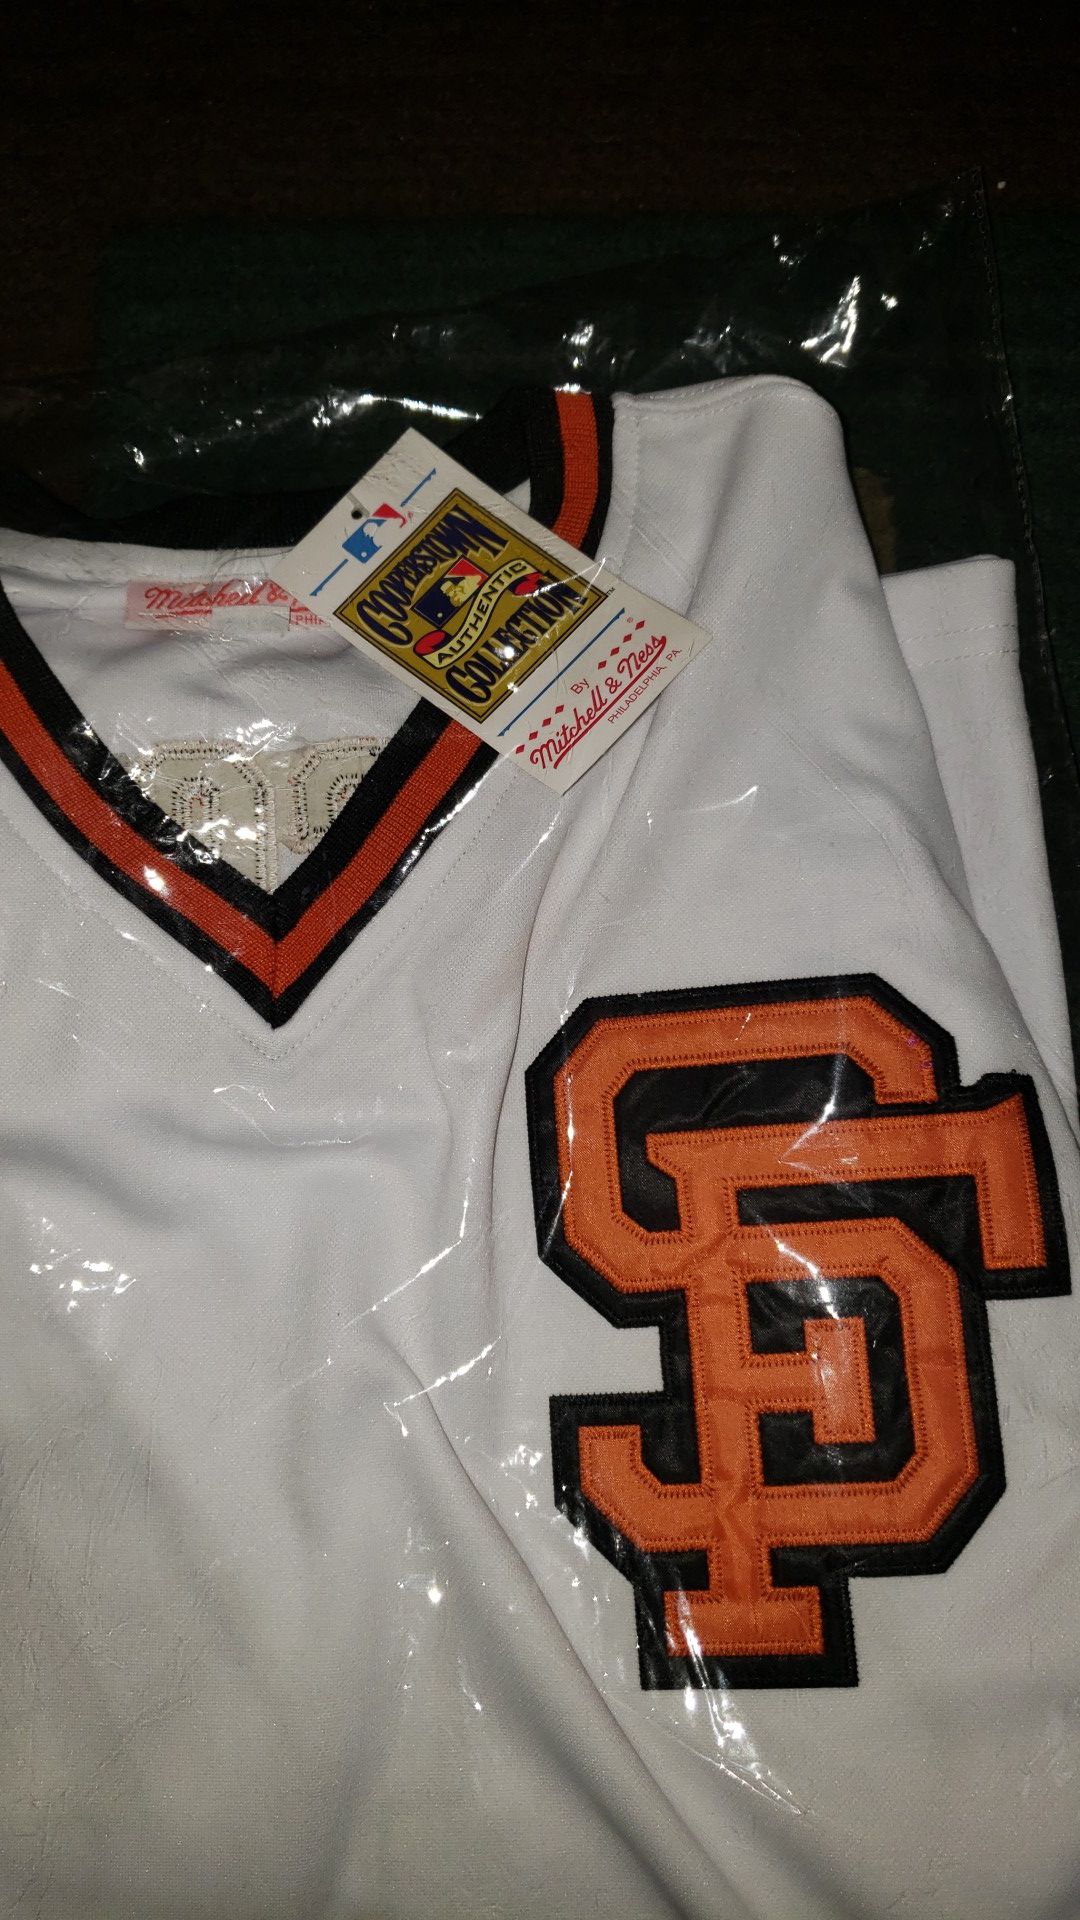 mitchell and ness throwback jersey